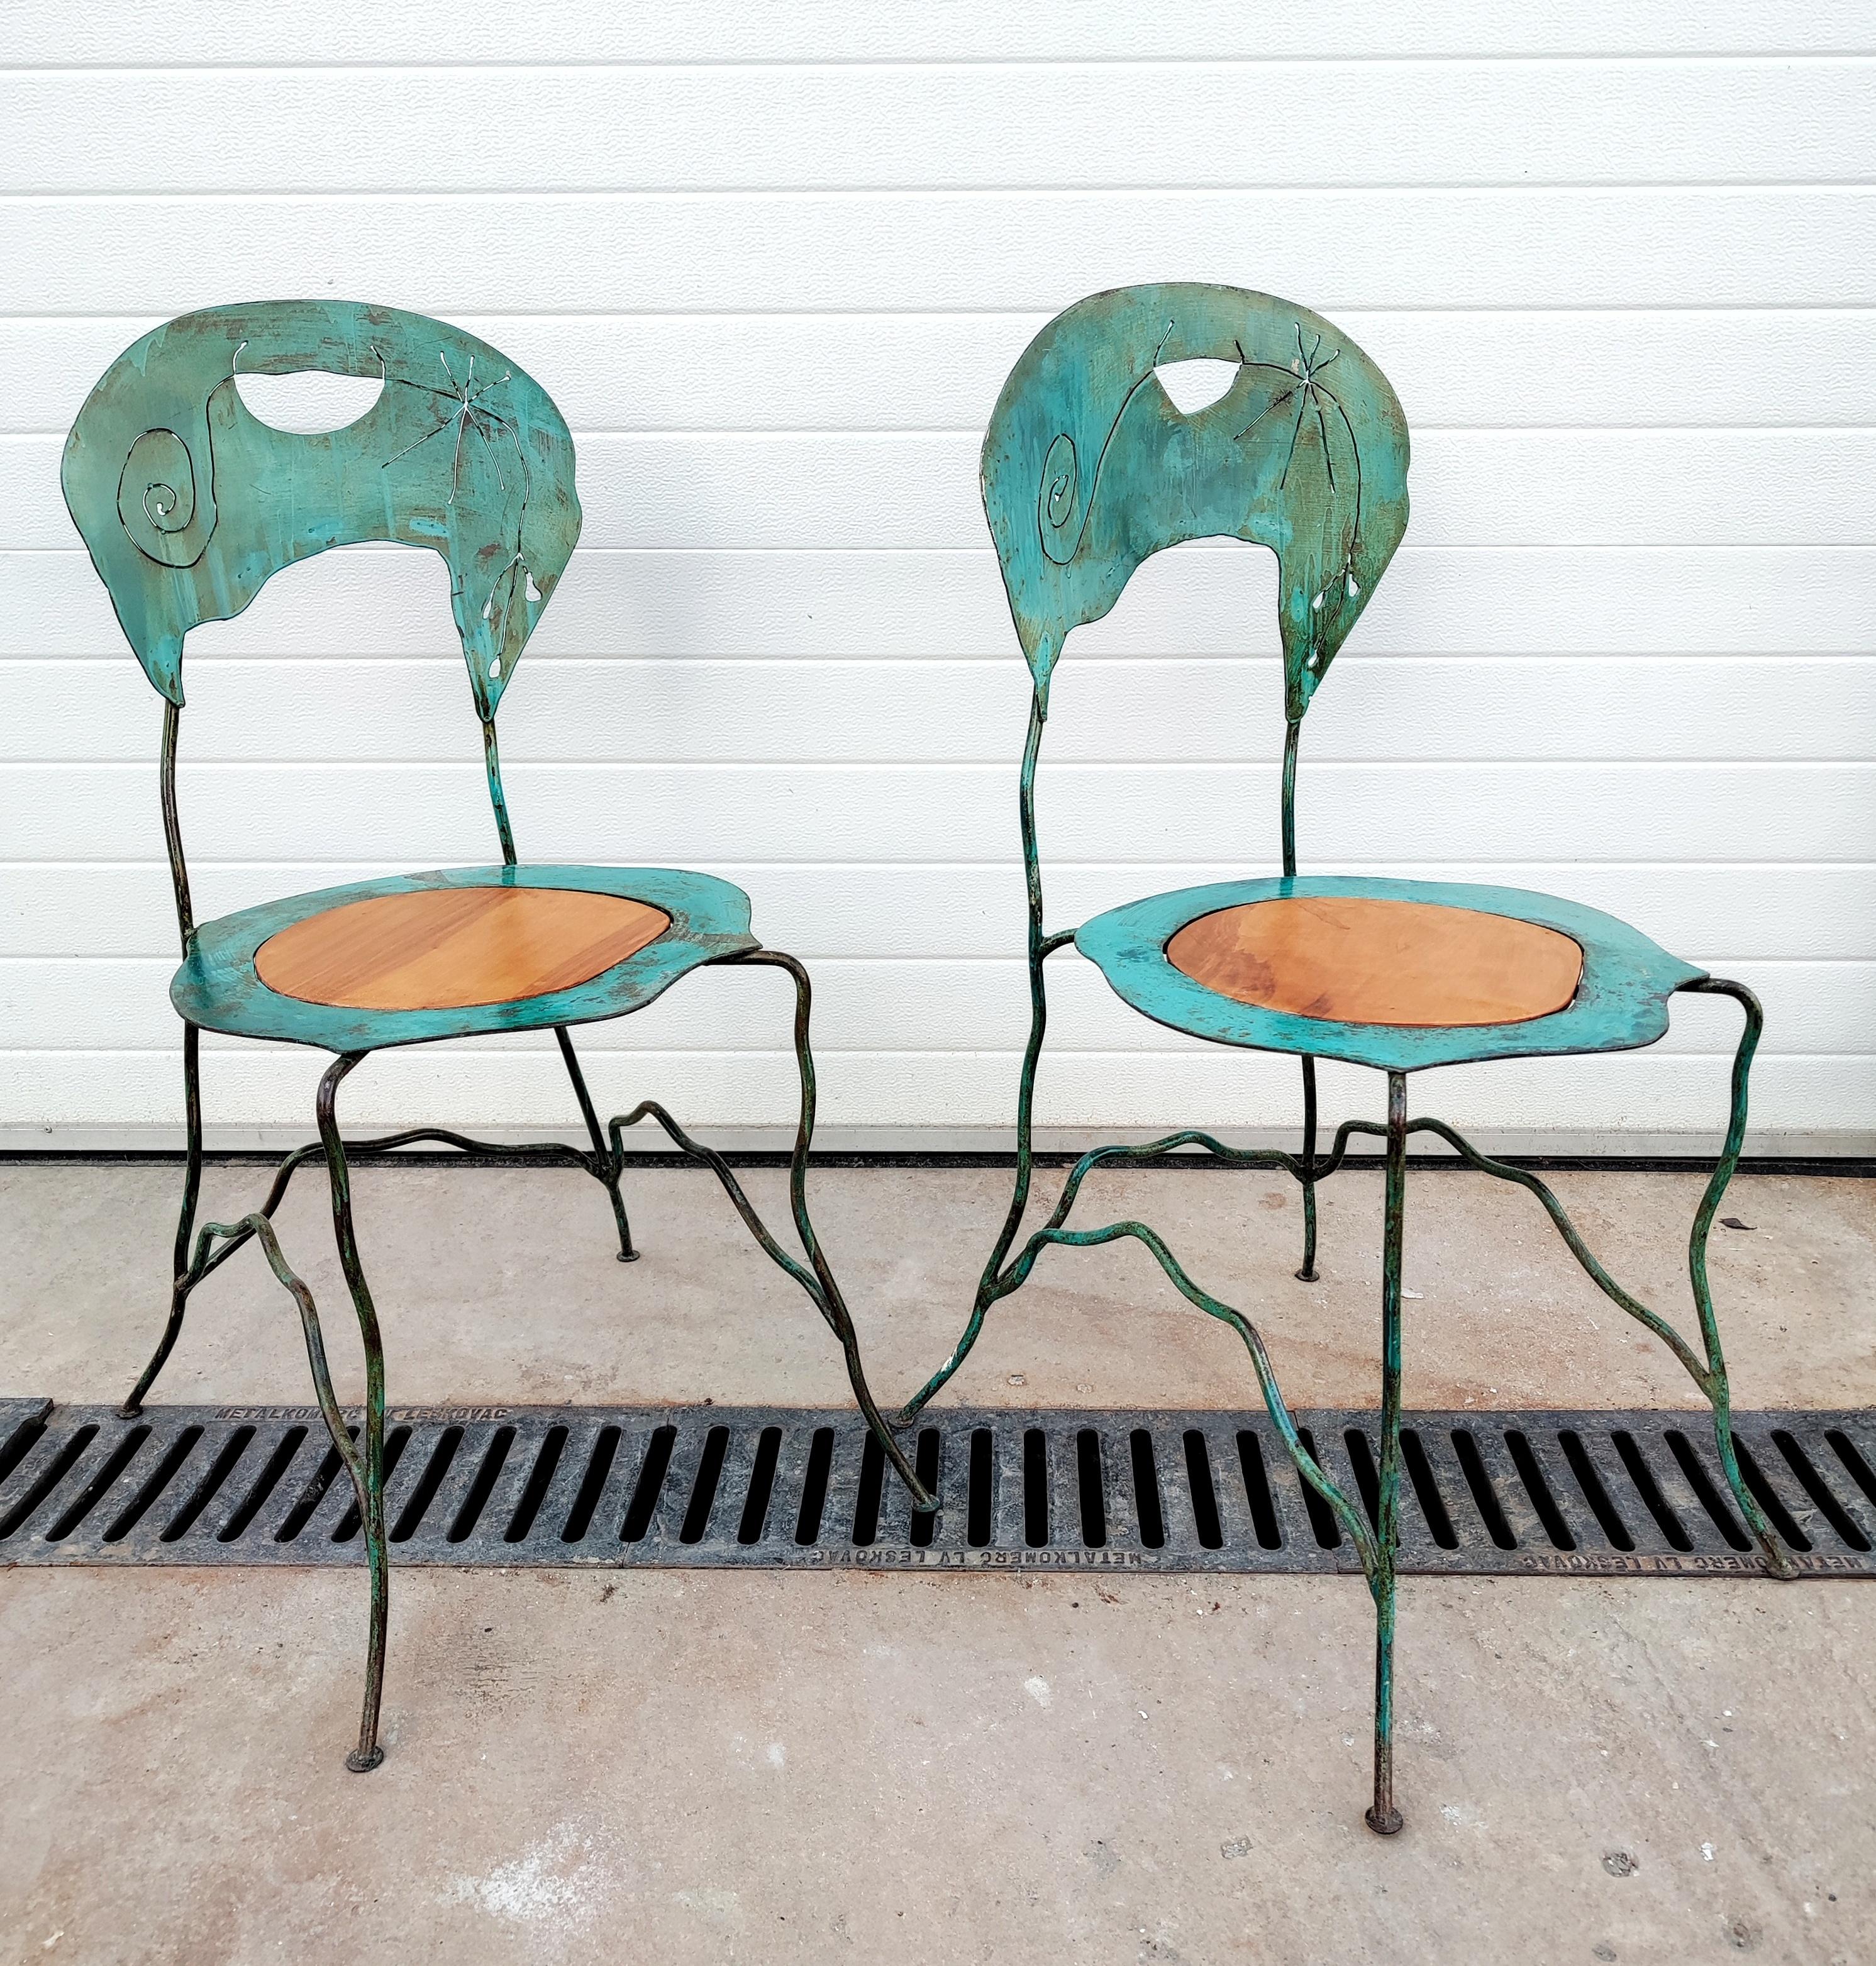 In this listing you will find a Pair of Extremally Rare Abstract and Very Sculptural Art Chairs designed by Bohuslav Horak (attr.). They are handmade of iron painted in green and wood and they feature beautiful, uneven lines with carvings in their